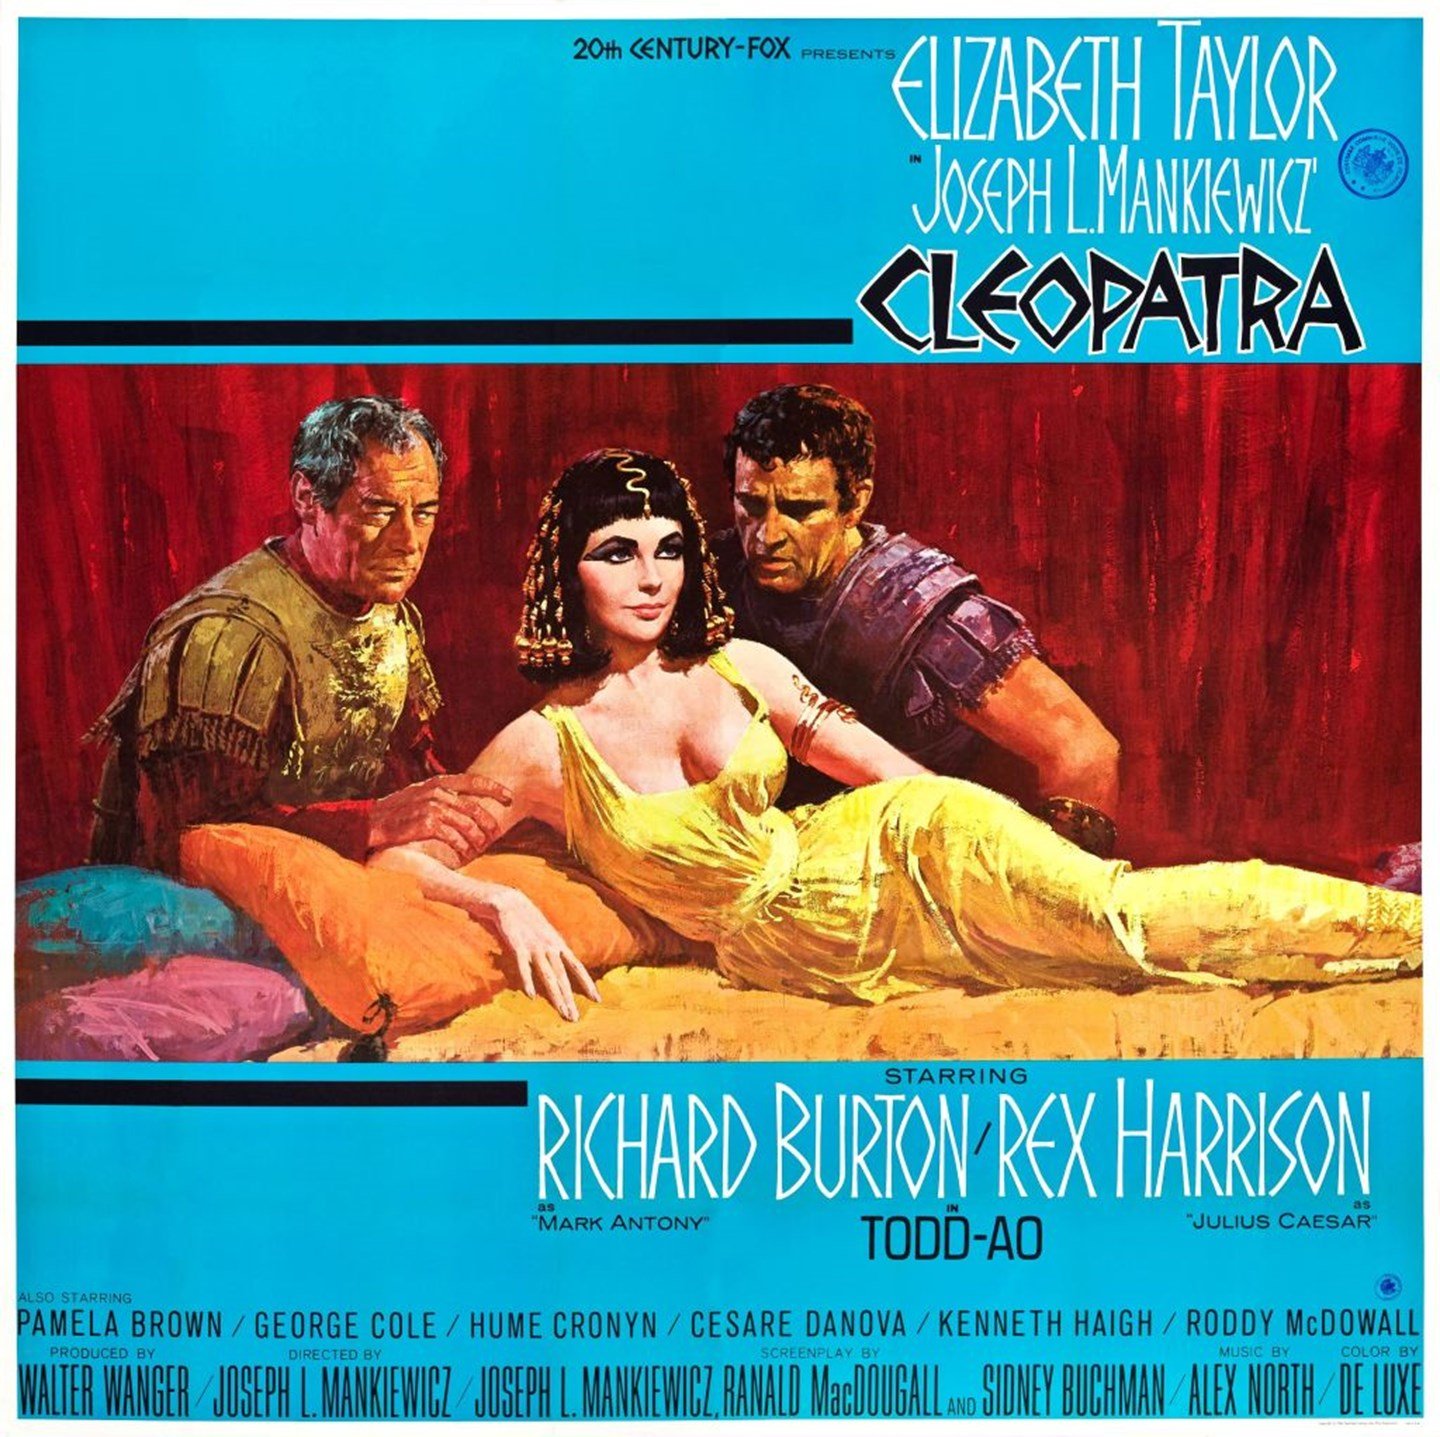 Elizabeth Taylor as Cleopatra poses laying down with two men staring at her